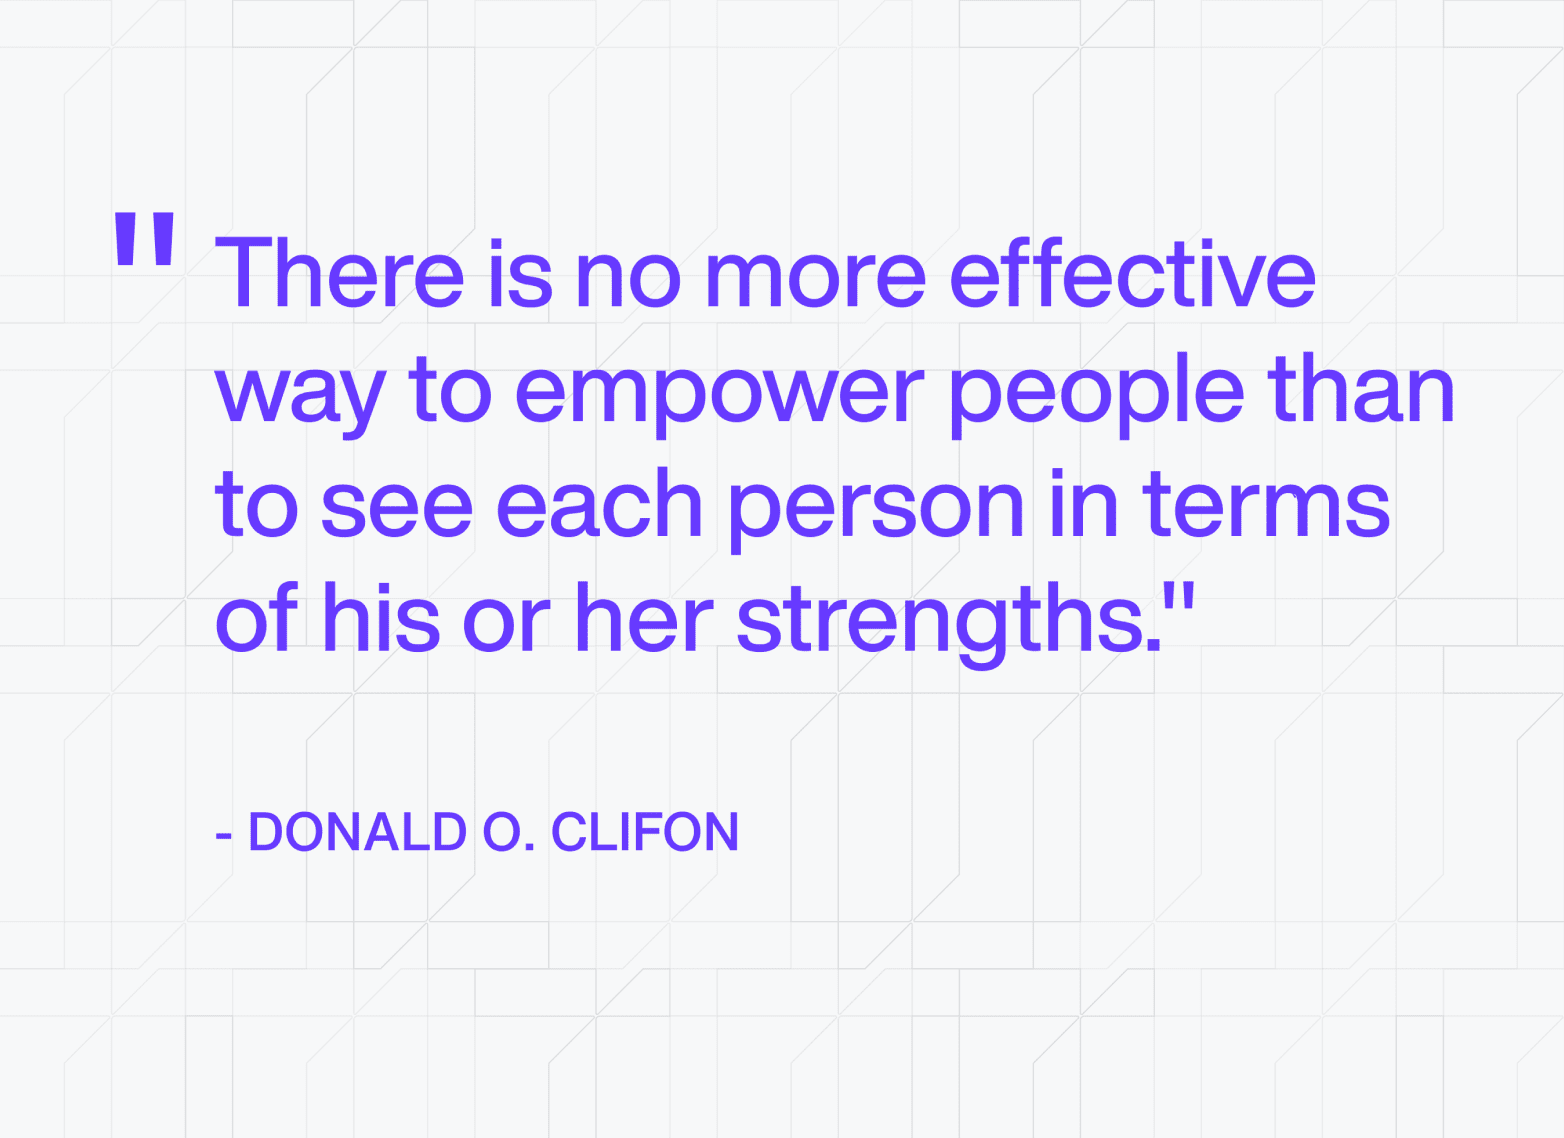 Quote from Donald O. Clifon about empowering people